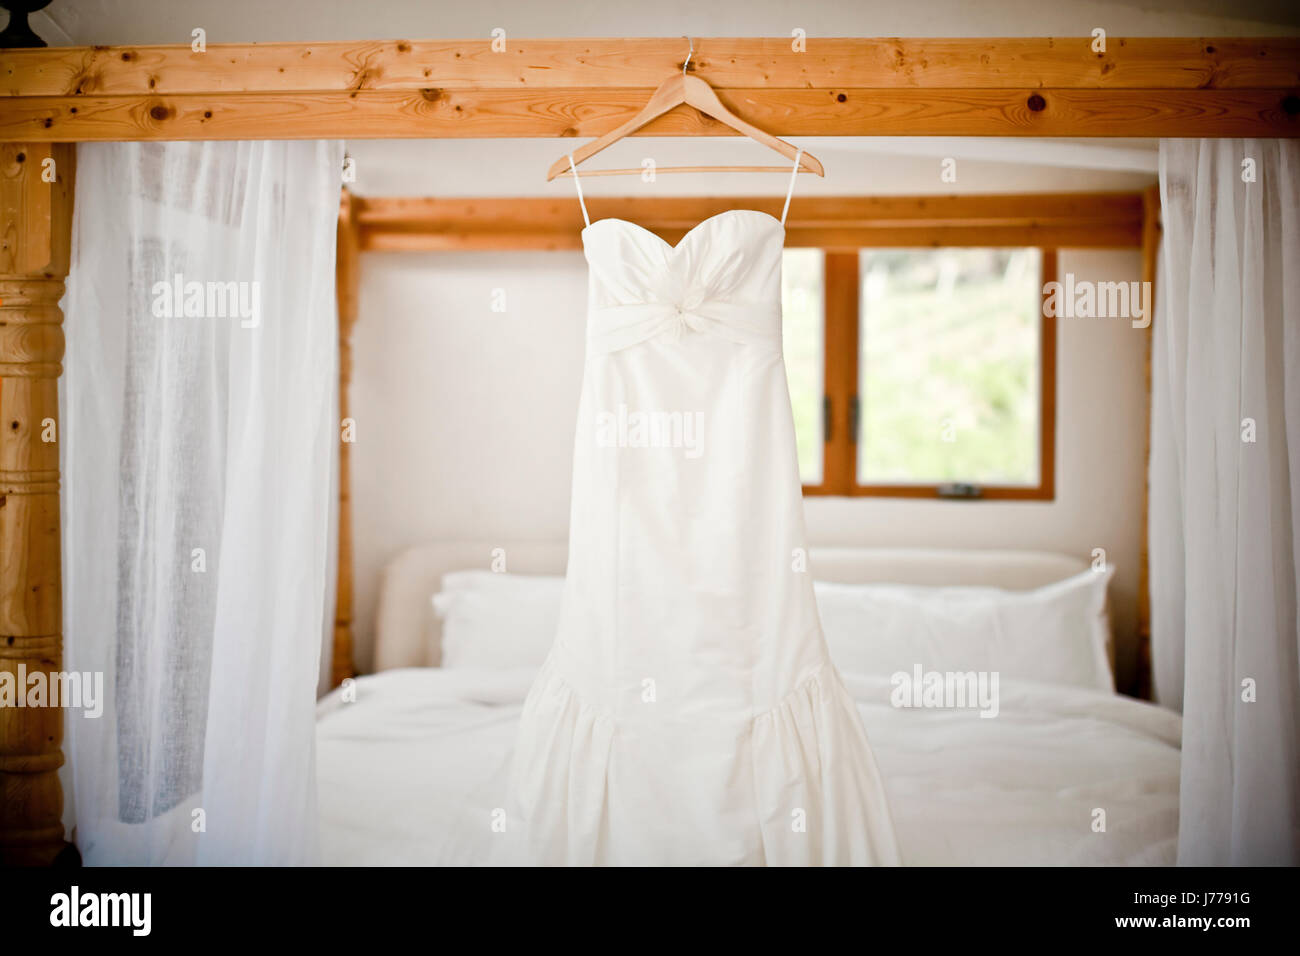 Hanging Bed Stock Photos Hanging Bed Stock Images Alamy